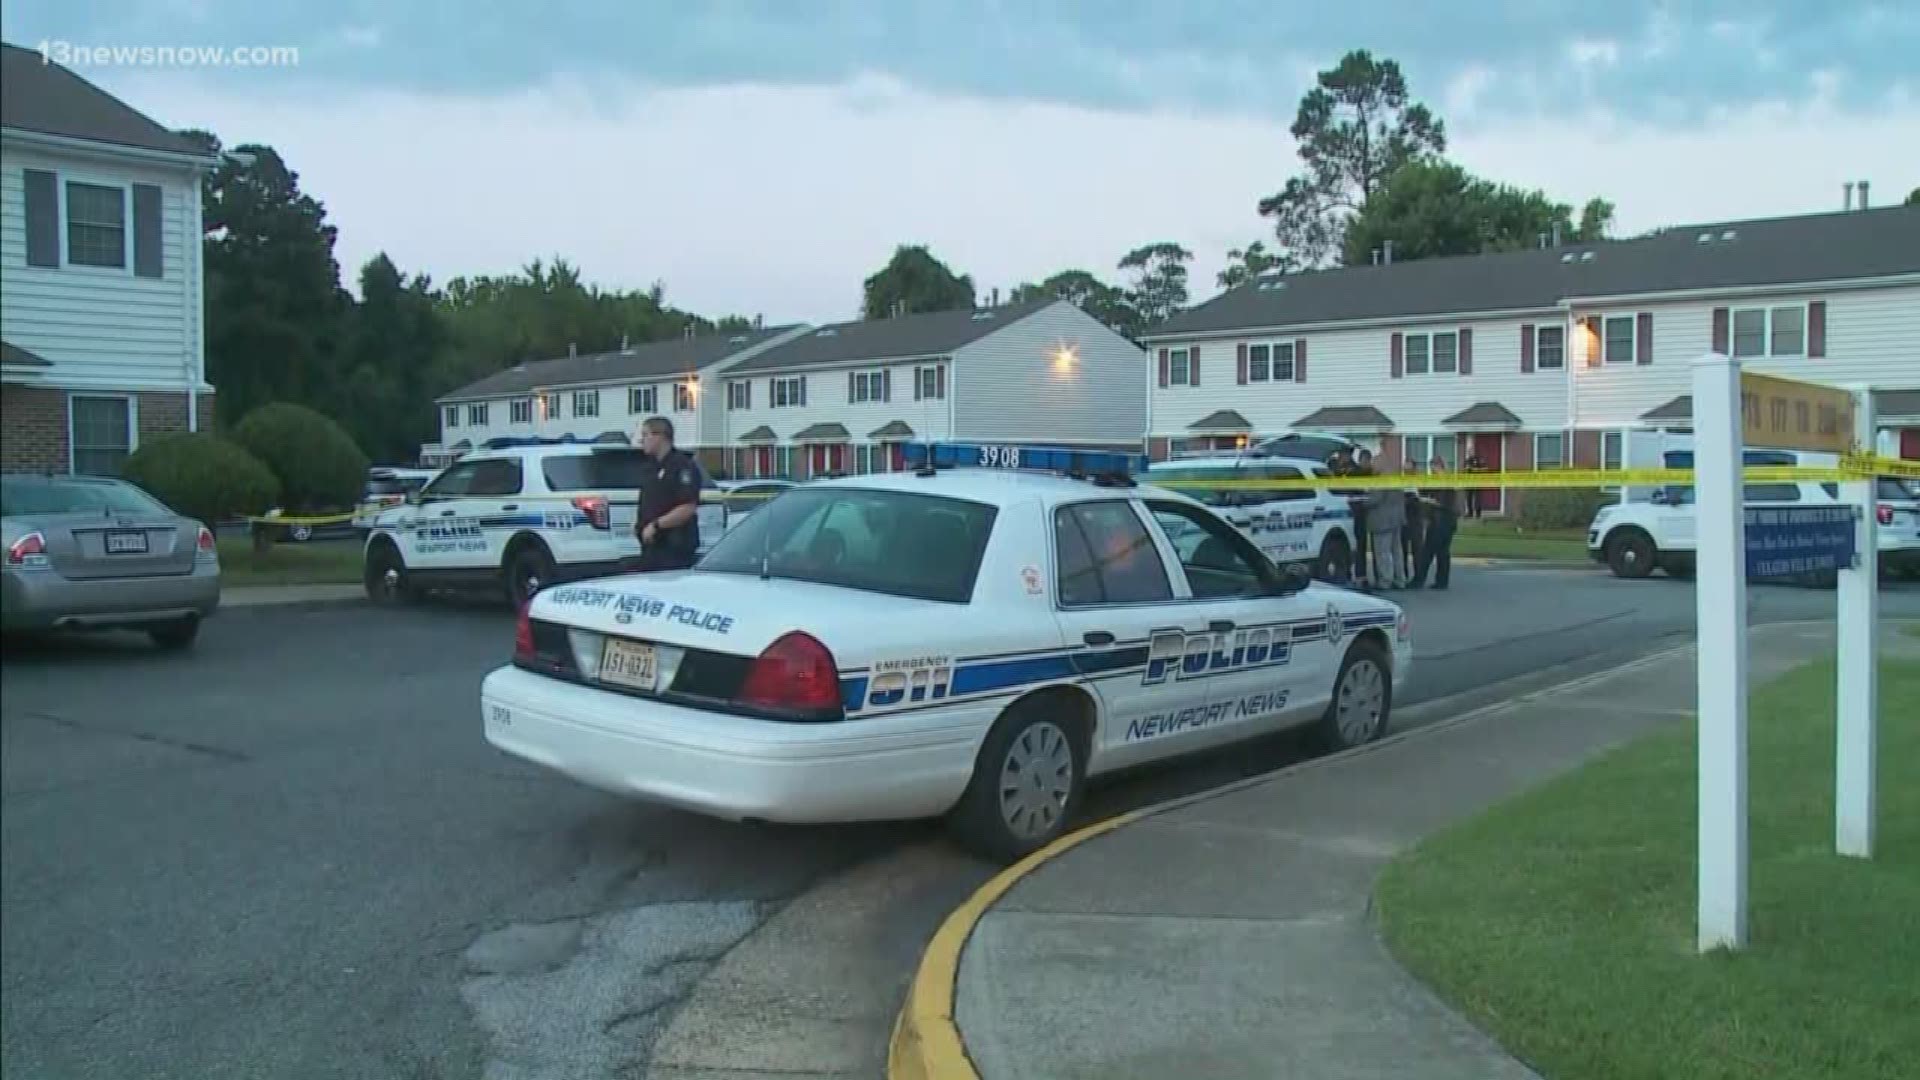 Newport News Police say they found a woman dead inside an apartment on Mytilene Drive at the City Line Apartments.